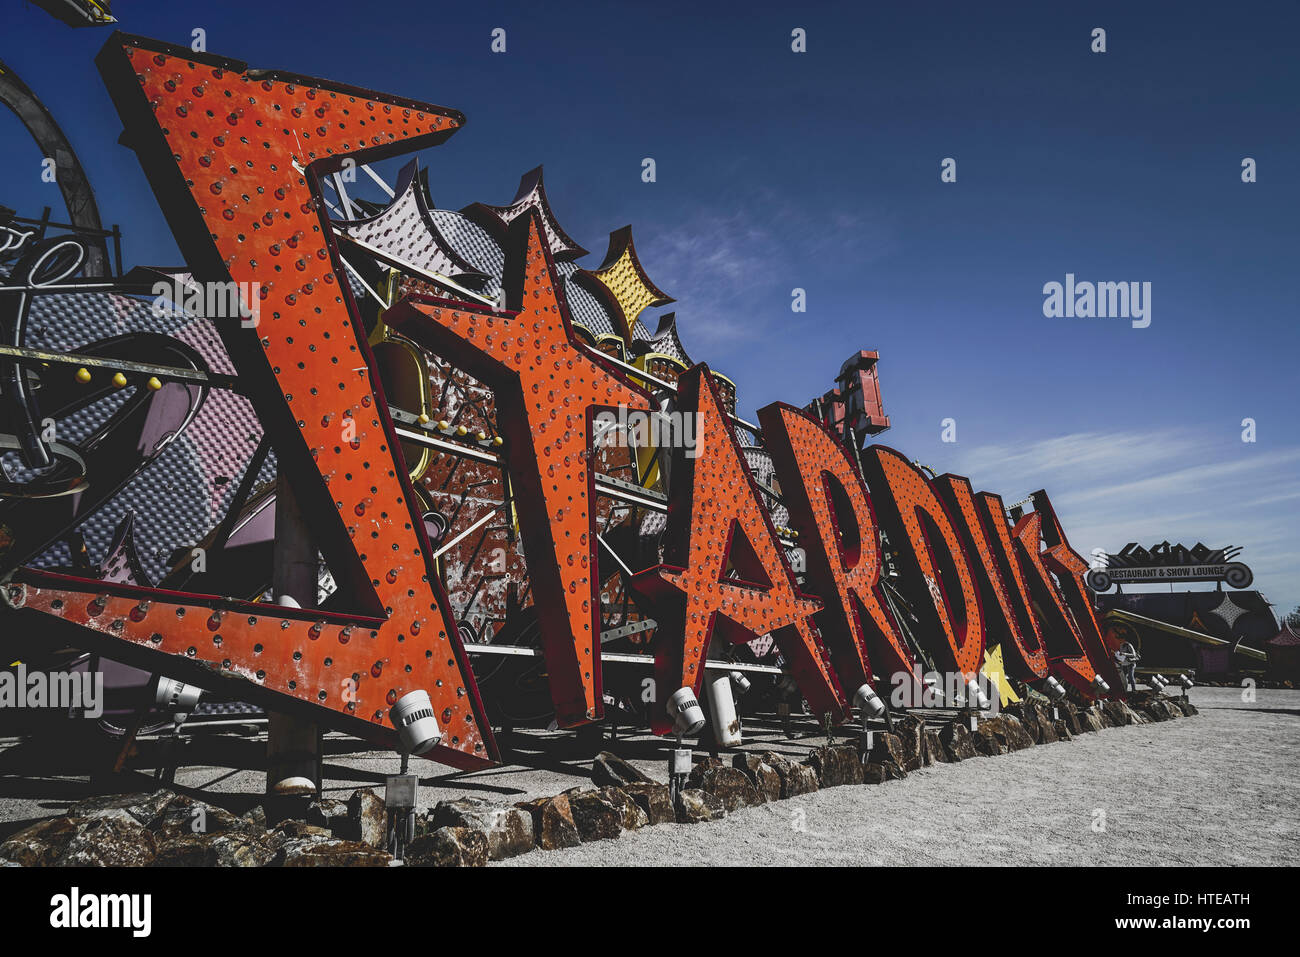 The Neon Boneyard museum in Las Vegas, United States of America. The museum shows world-famous signs of Las Vegas like the “Stardust”. Stock Photo